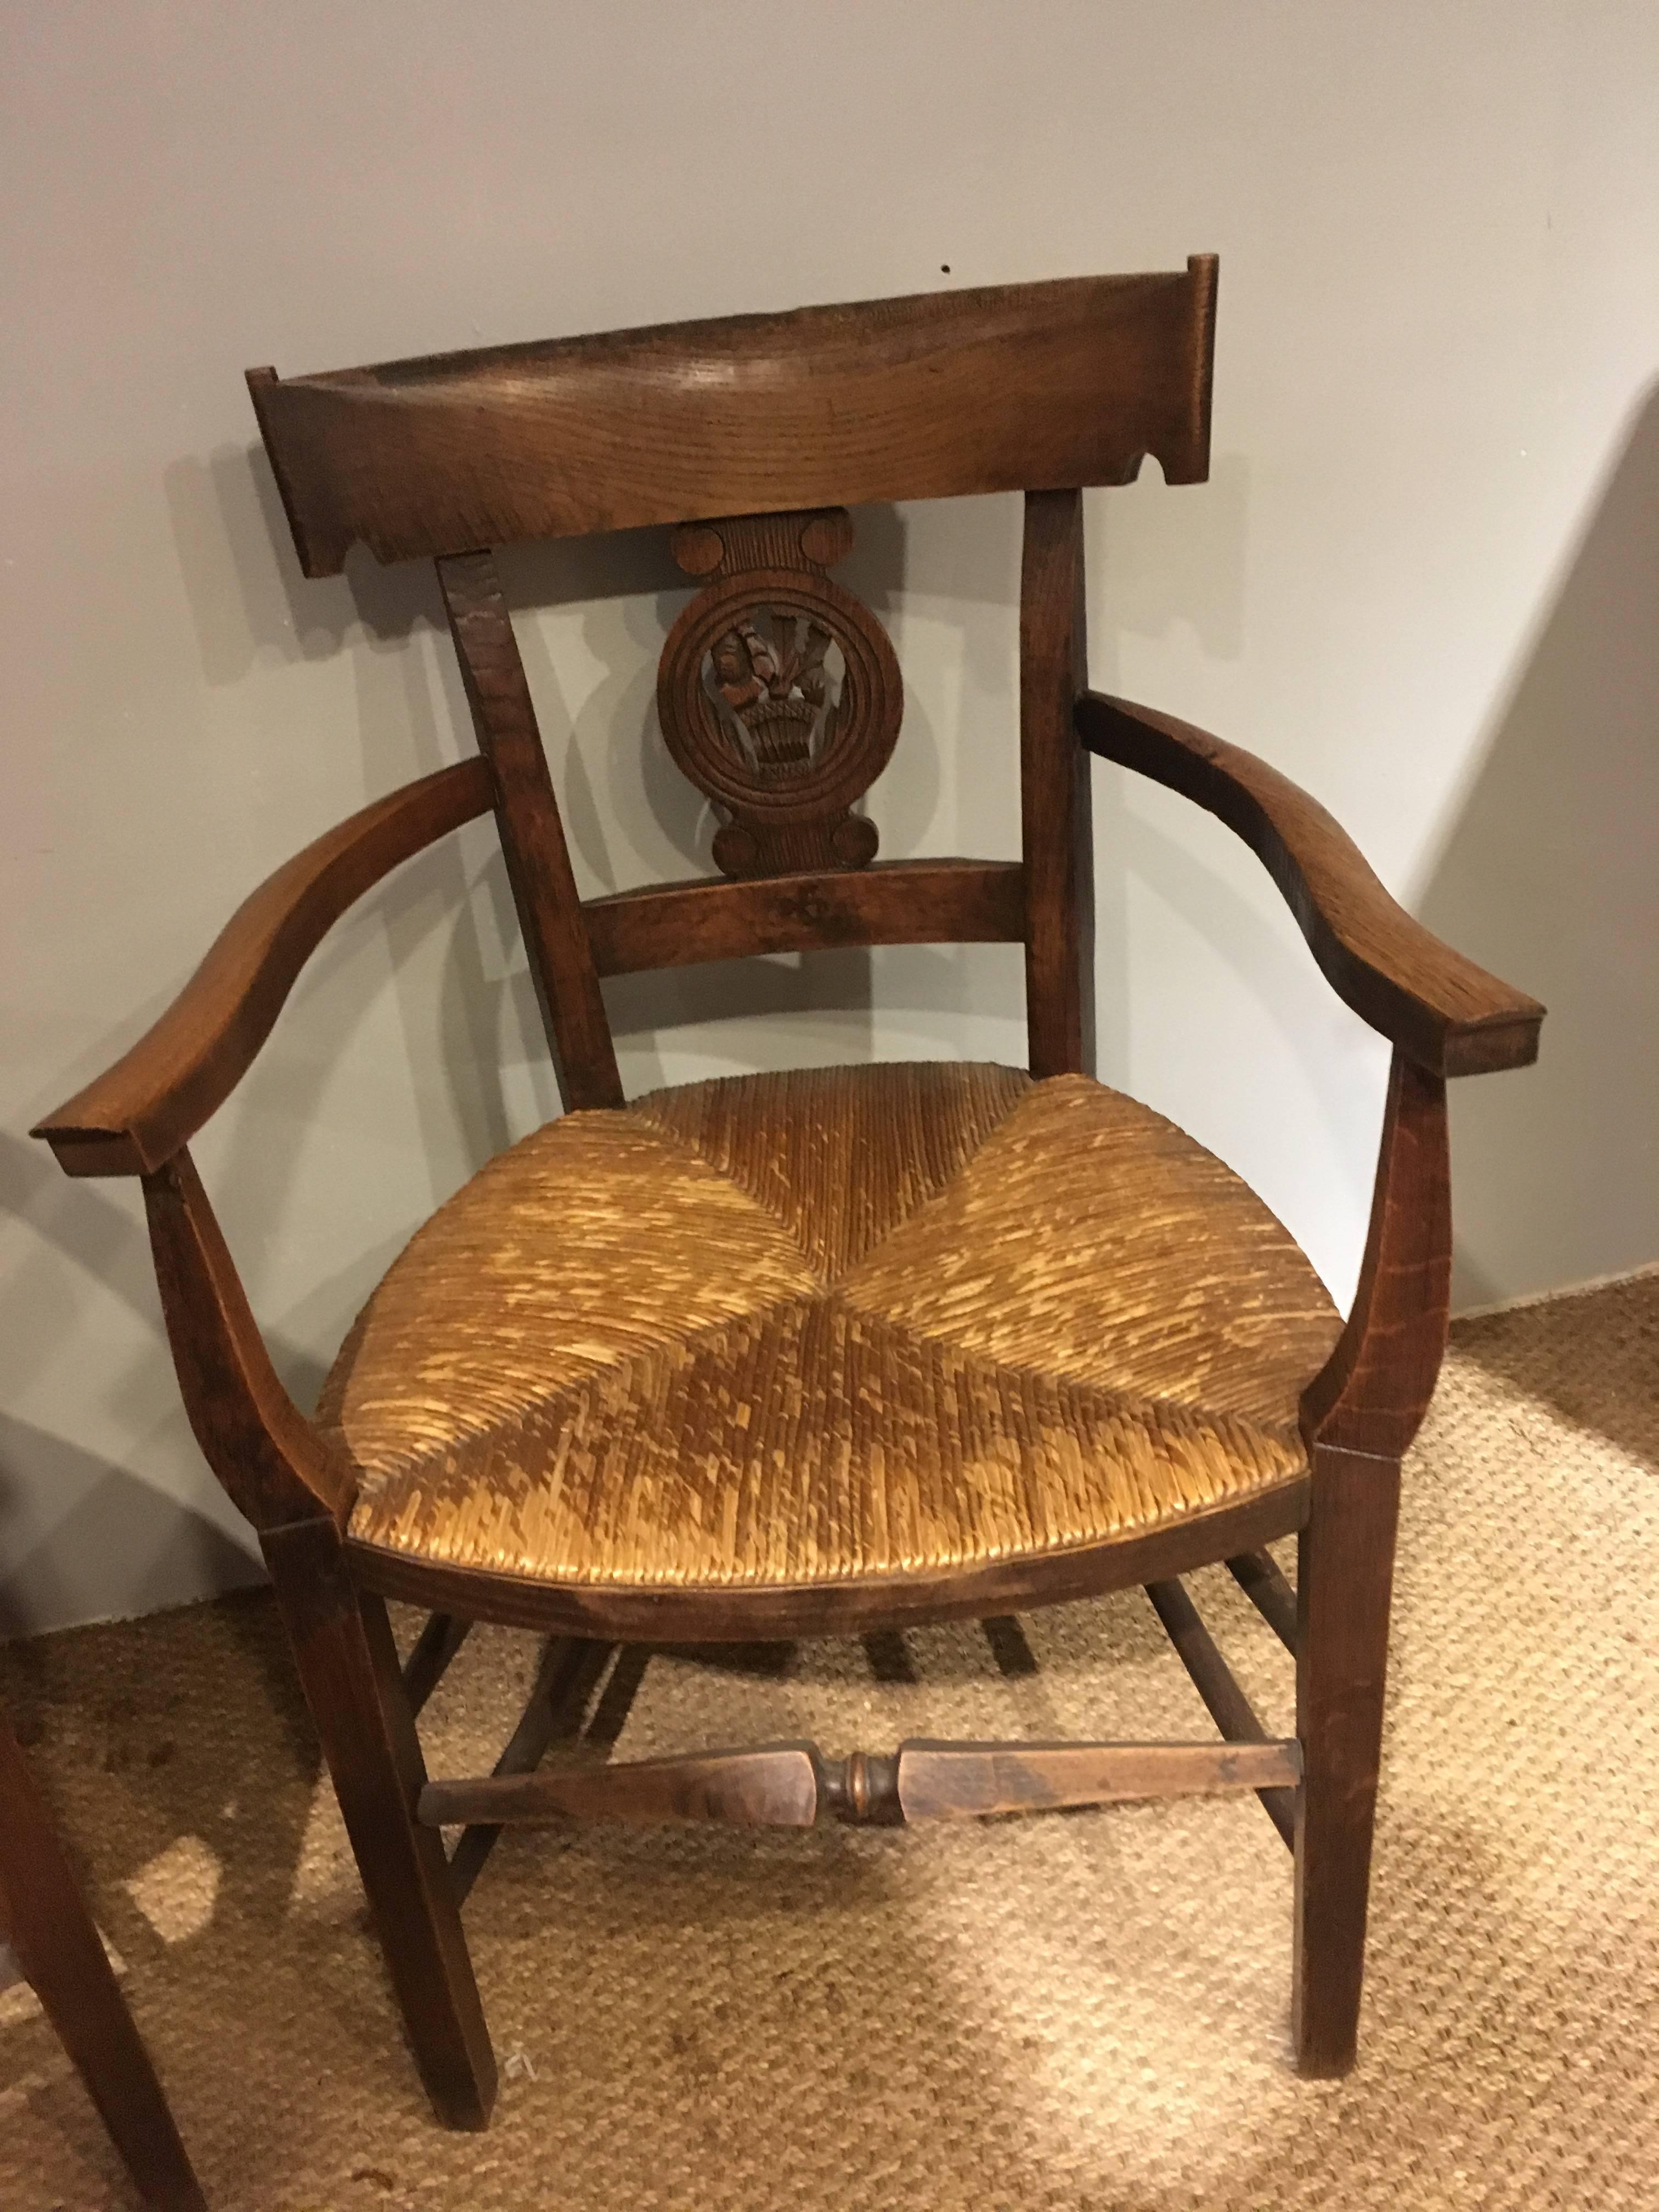 Very stylish pair of oak early 20th century rush seated country carvers chairs 
All the joints are firm and the rush seats are in good order 
circa 1920 
Measures: Depth 25 inches
Width 21 inches
Height 35 inches.